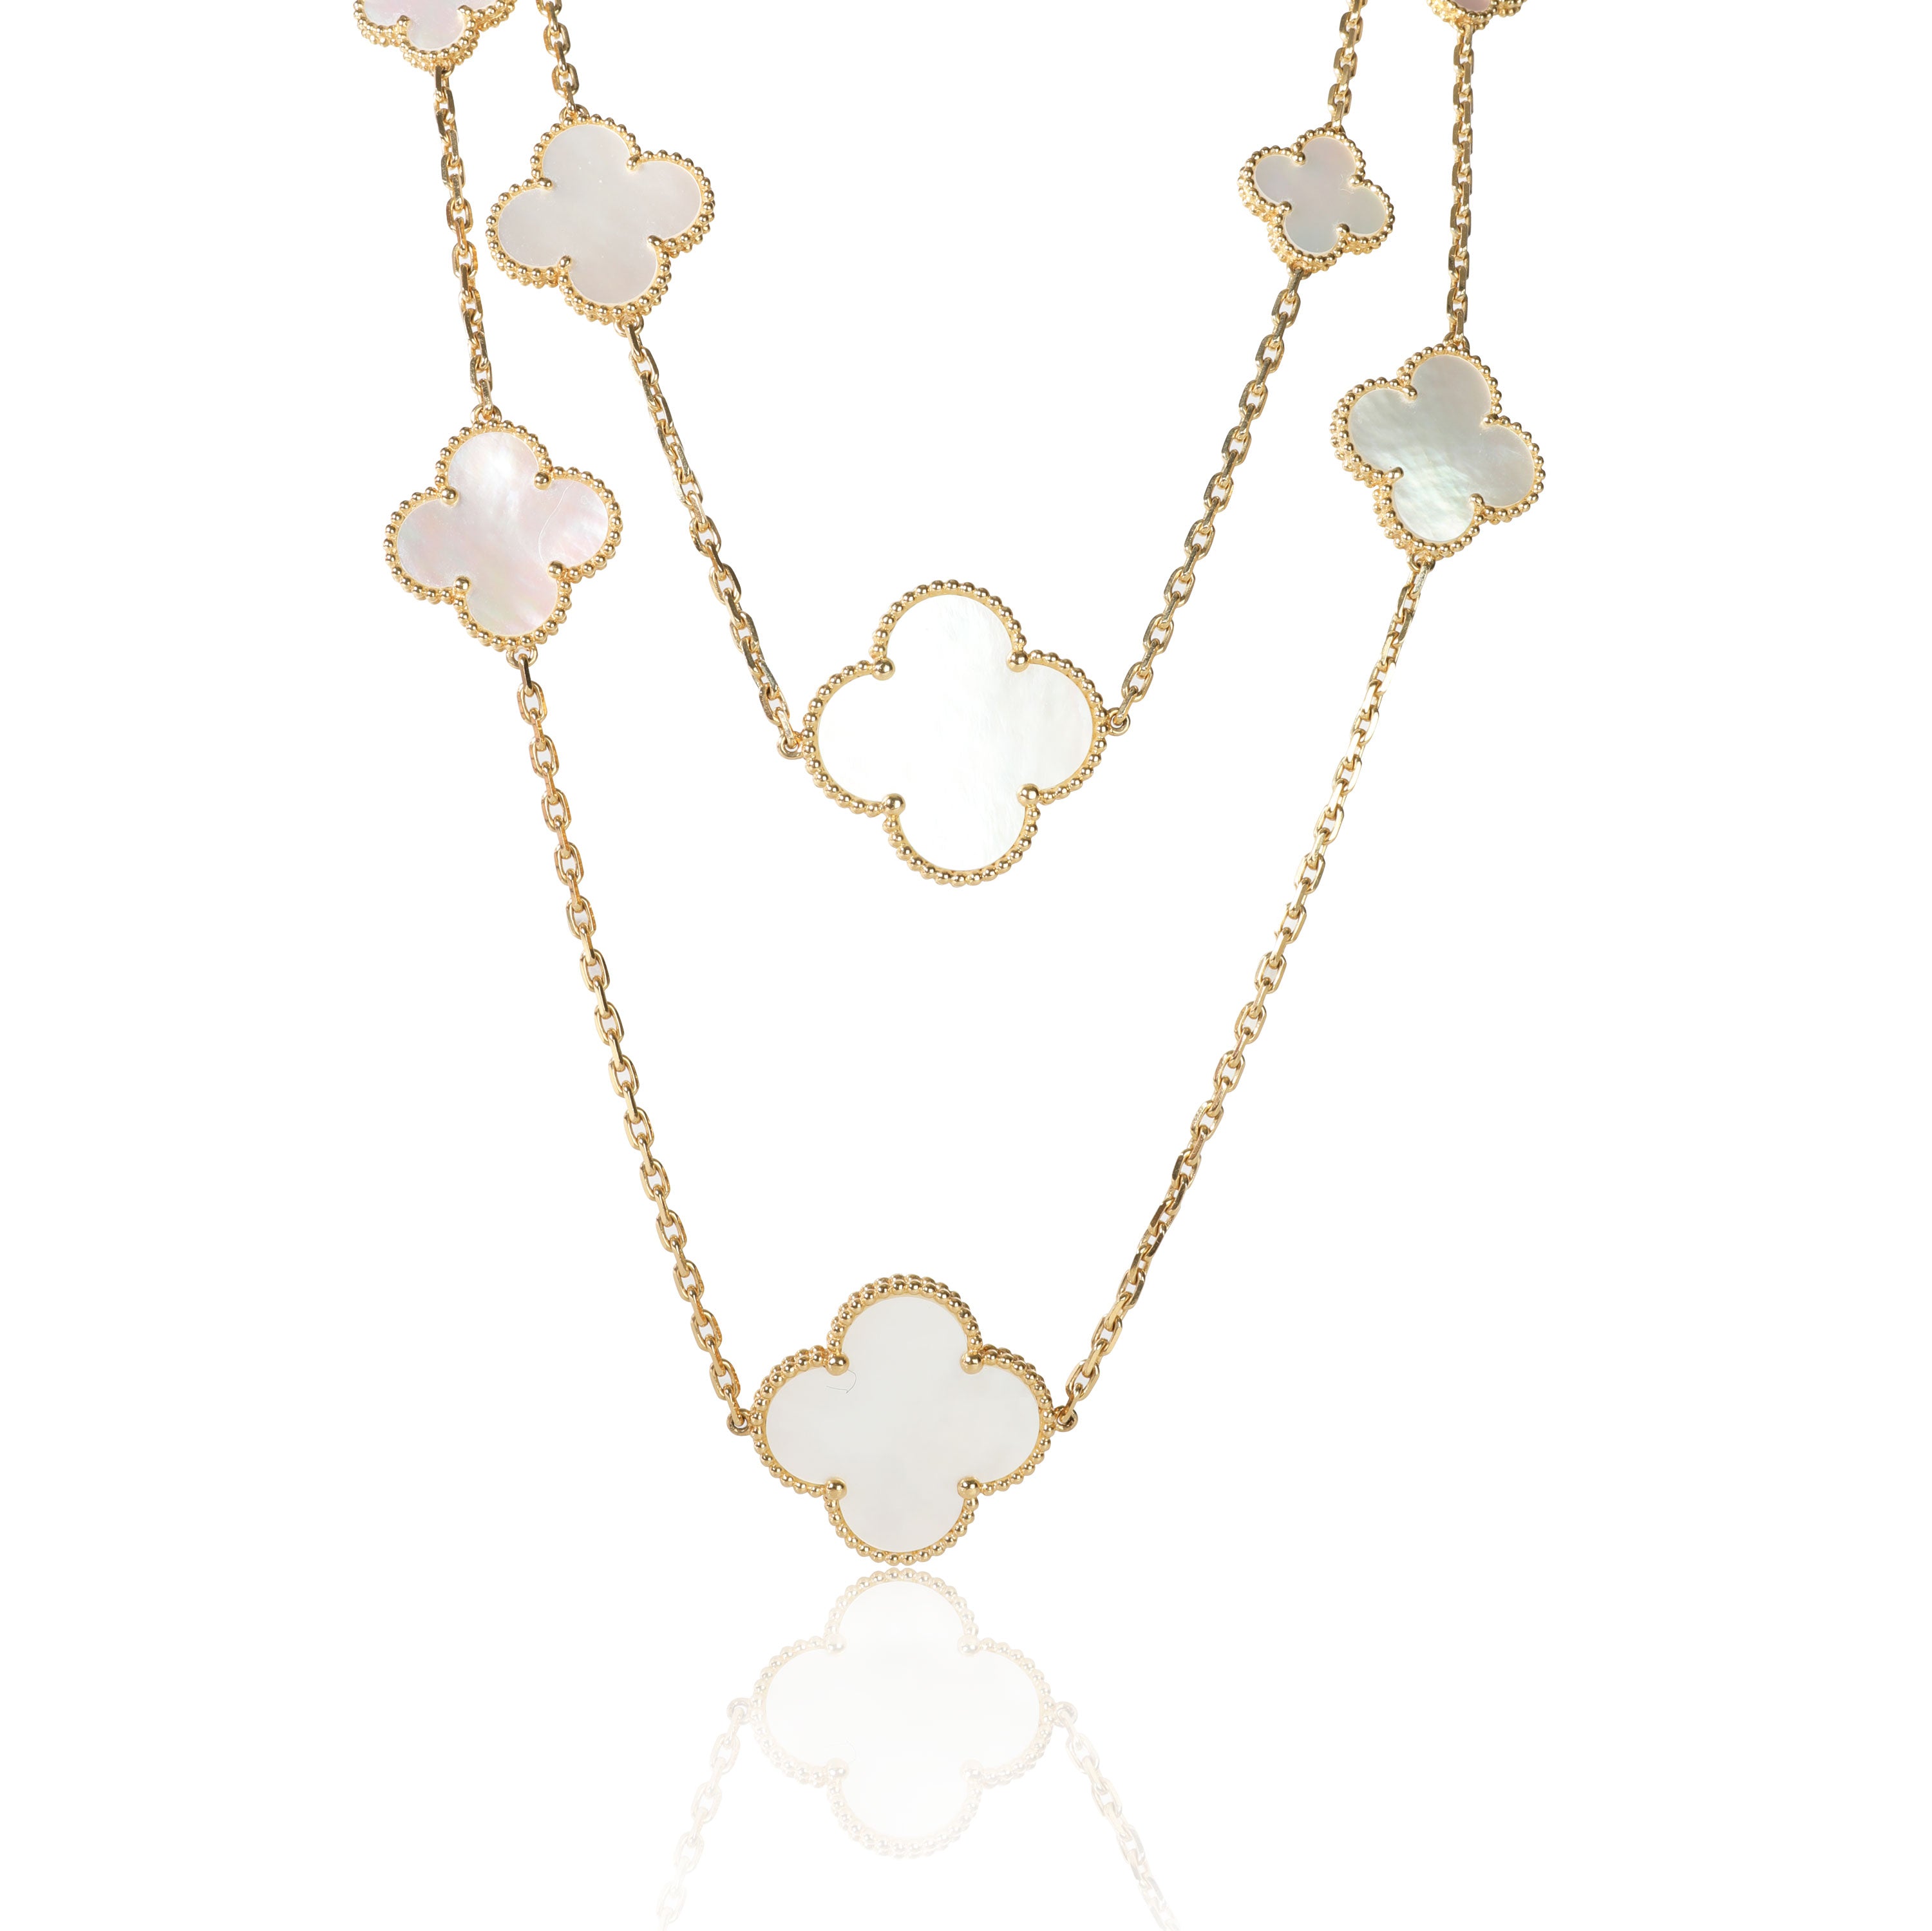 Magic Alhambra long necklace, 16 motifs 18K yellow gold, Mother-of-pearl- Van  Cleef & Arpels